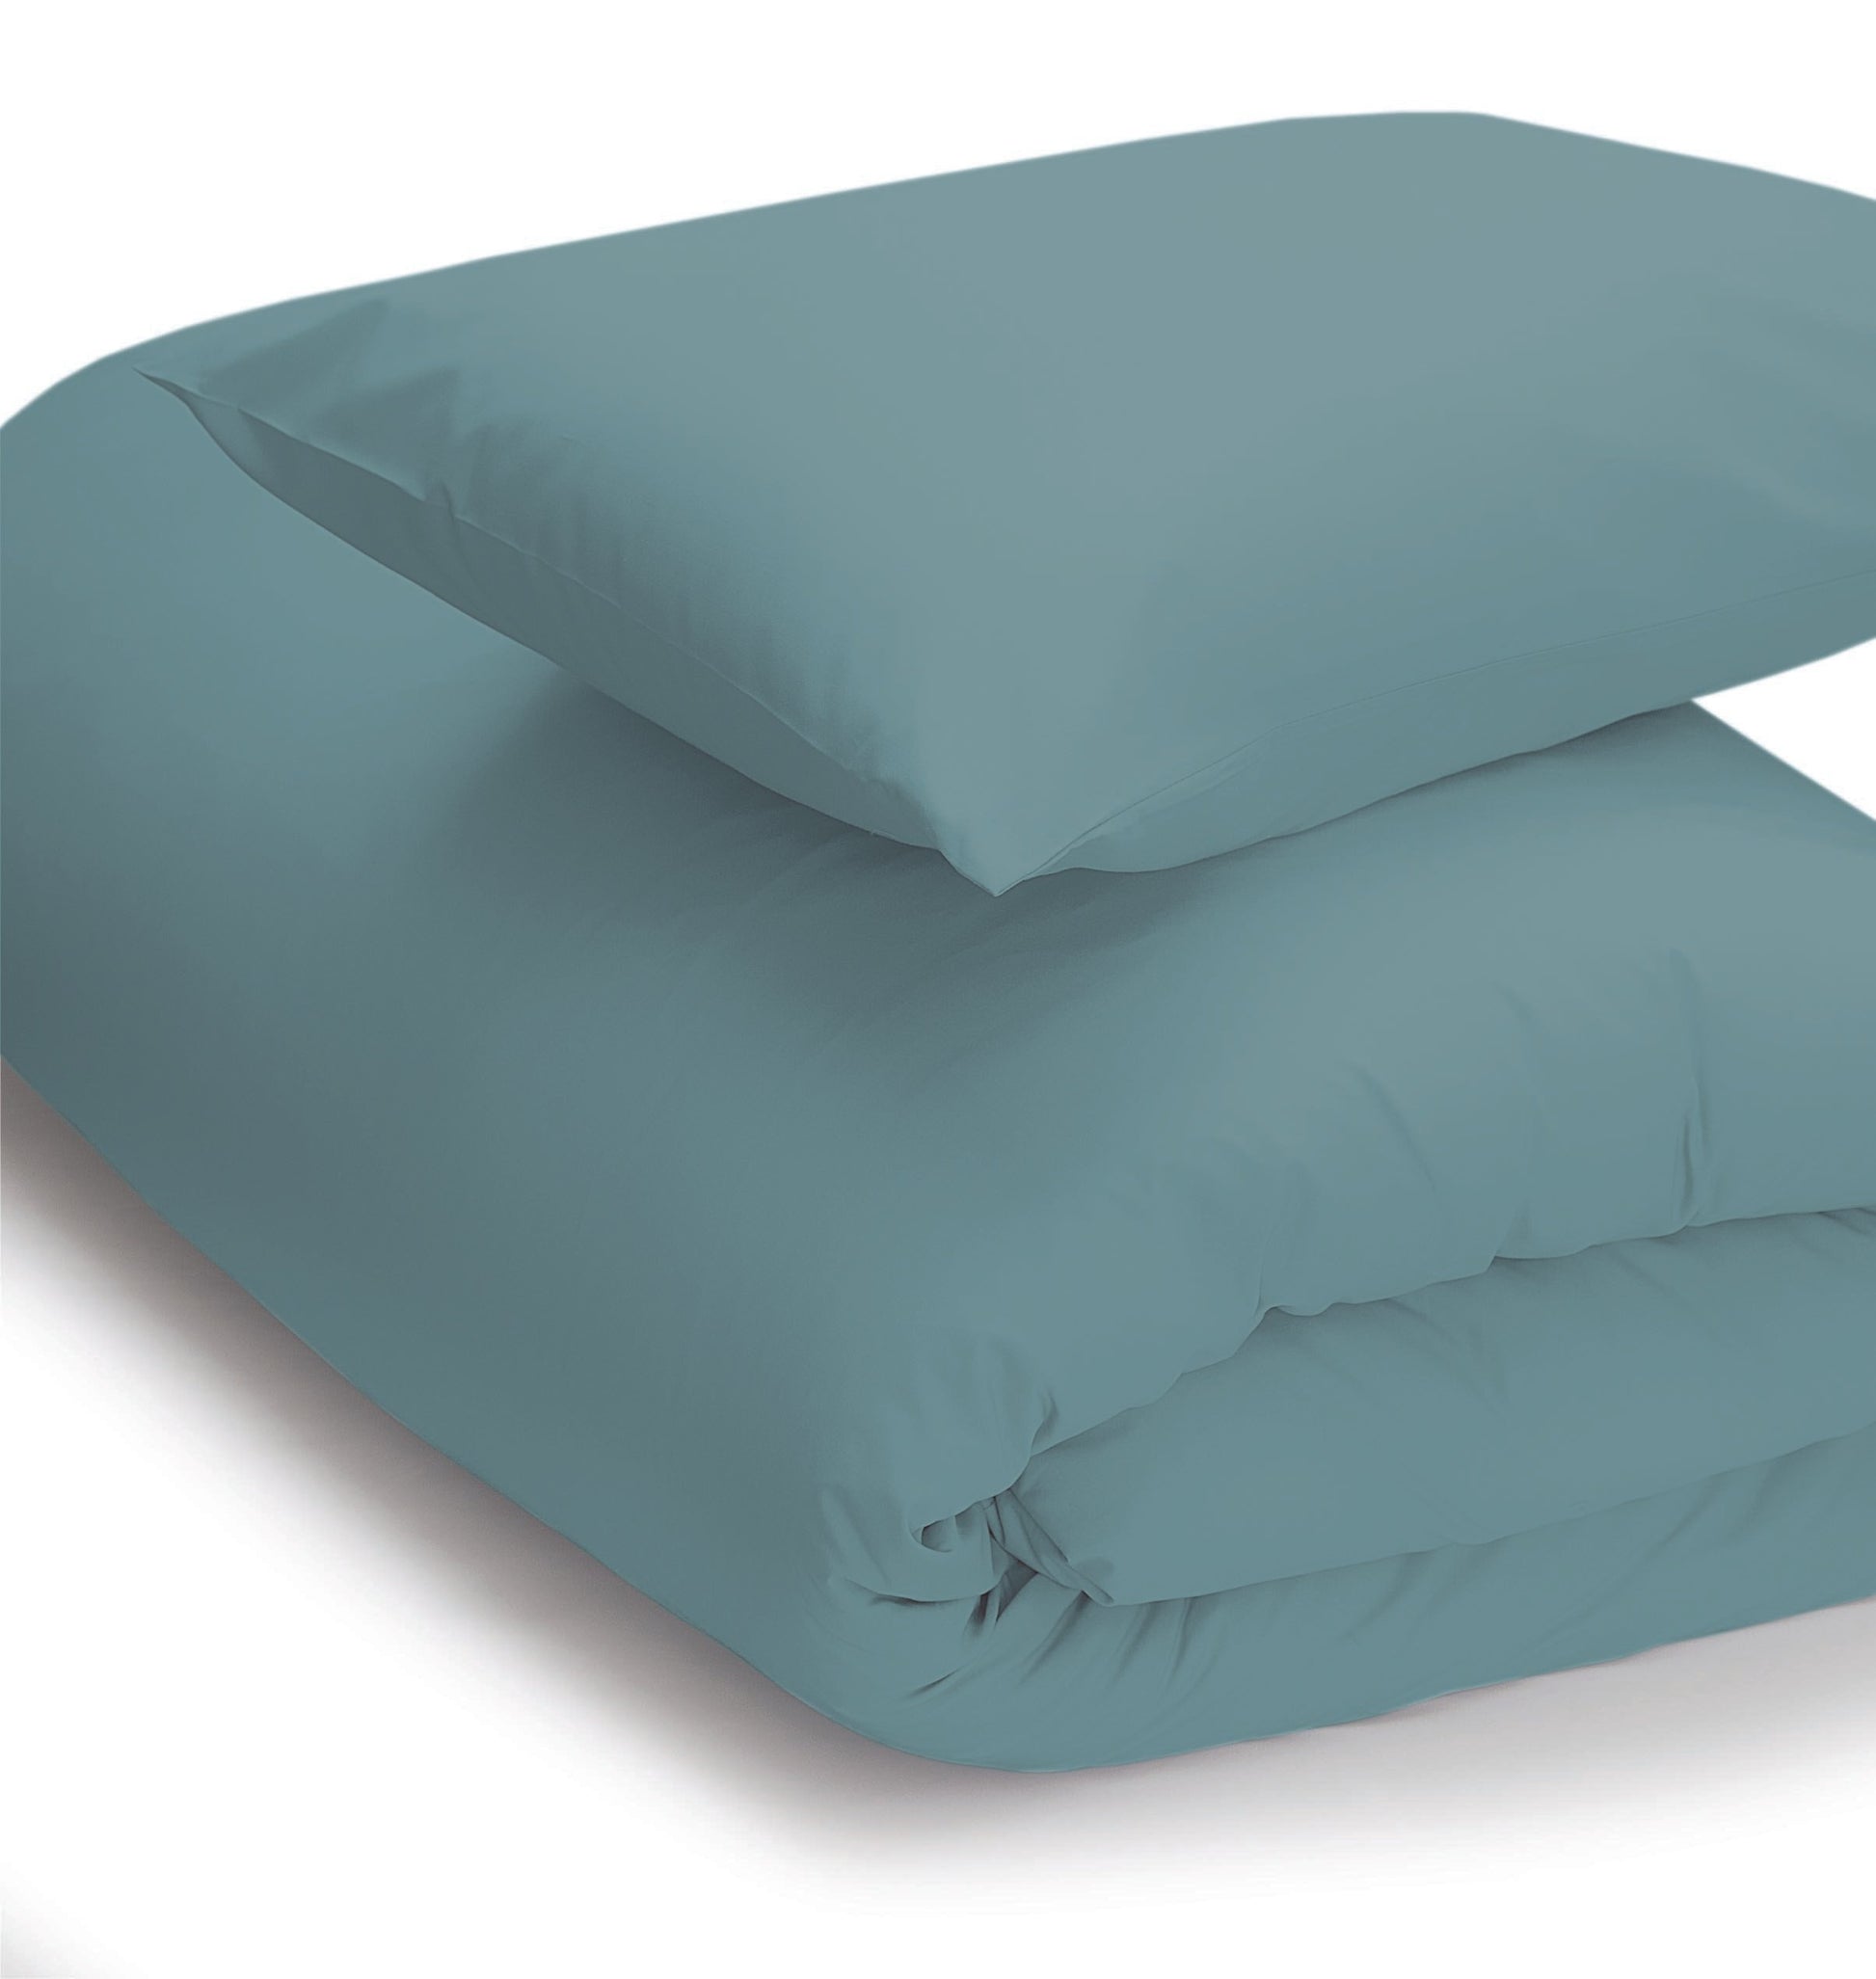 Teal colour bedding pack